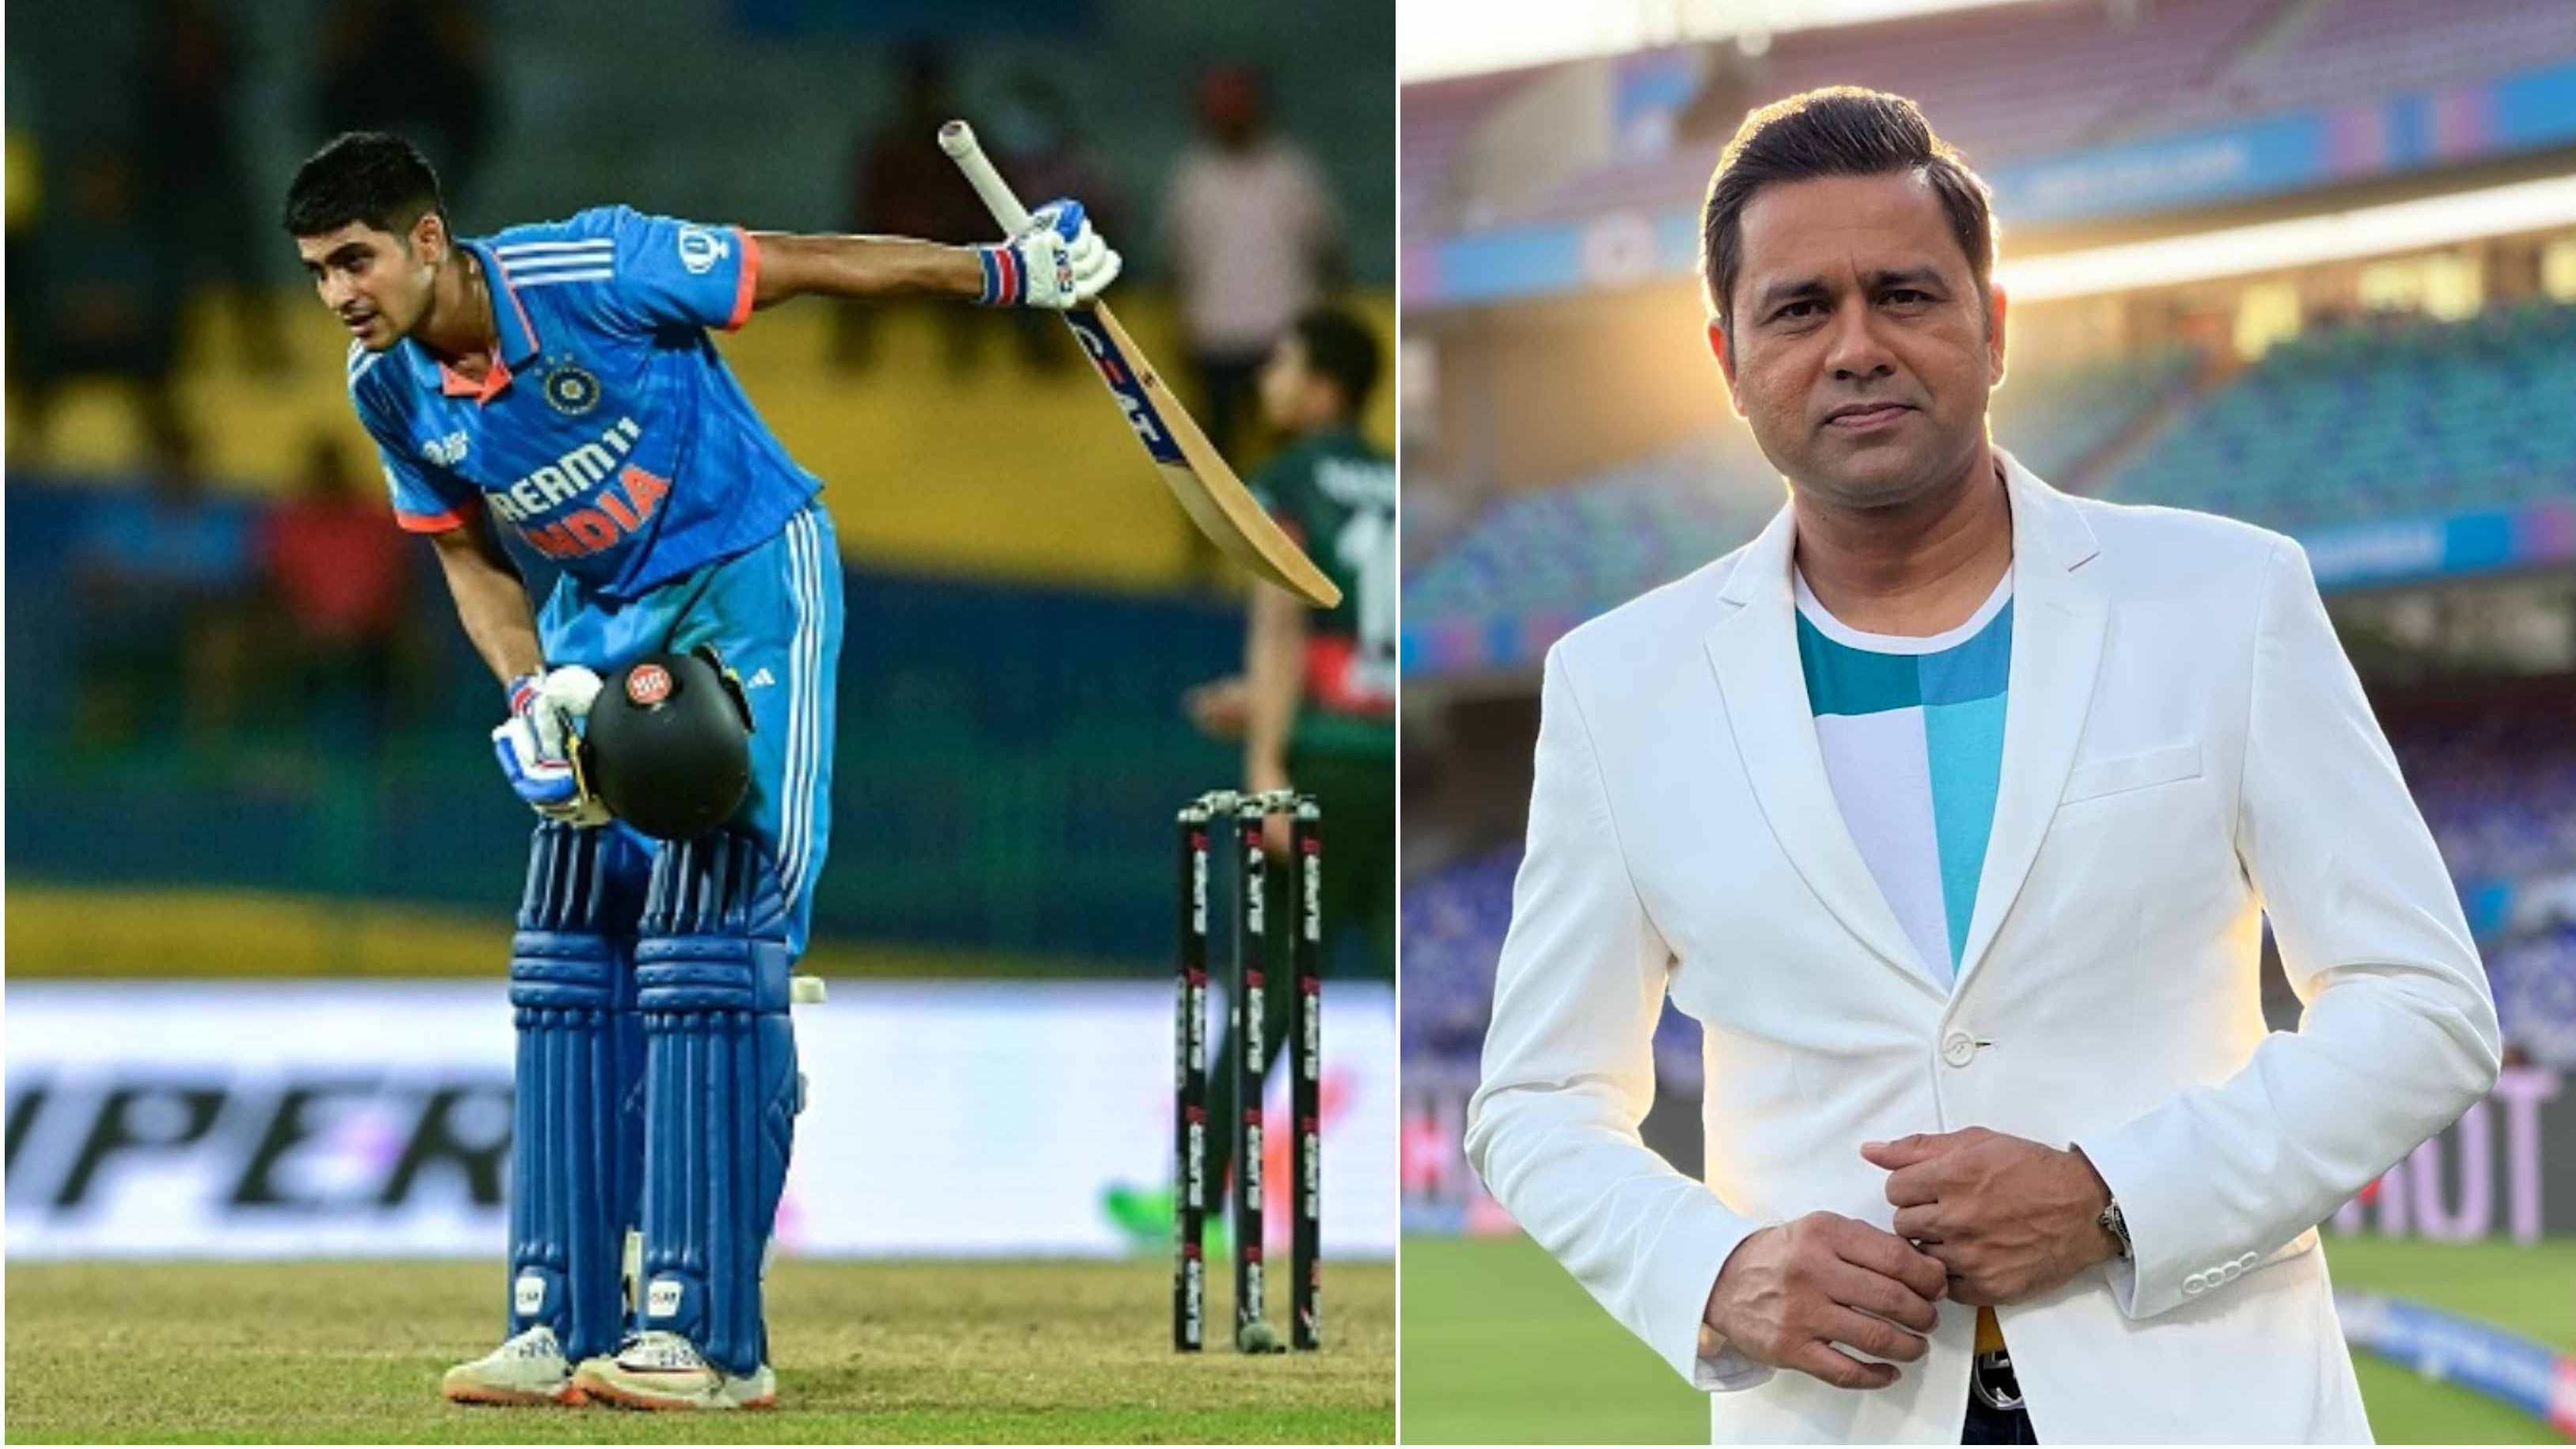 CWC 2023: Aakash Chopra predicts Shubman Gill to score “at least two hundreds” during the World Cup